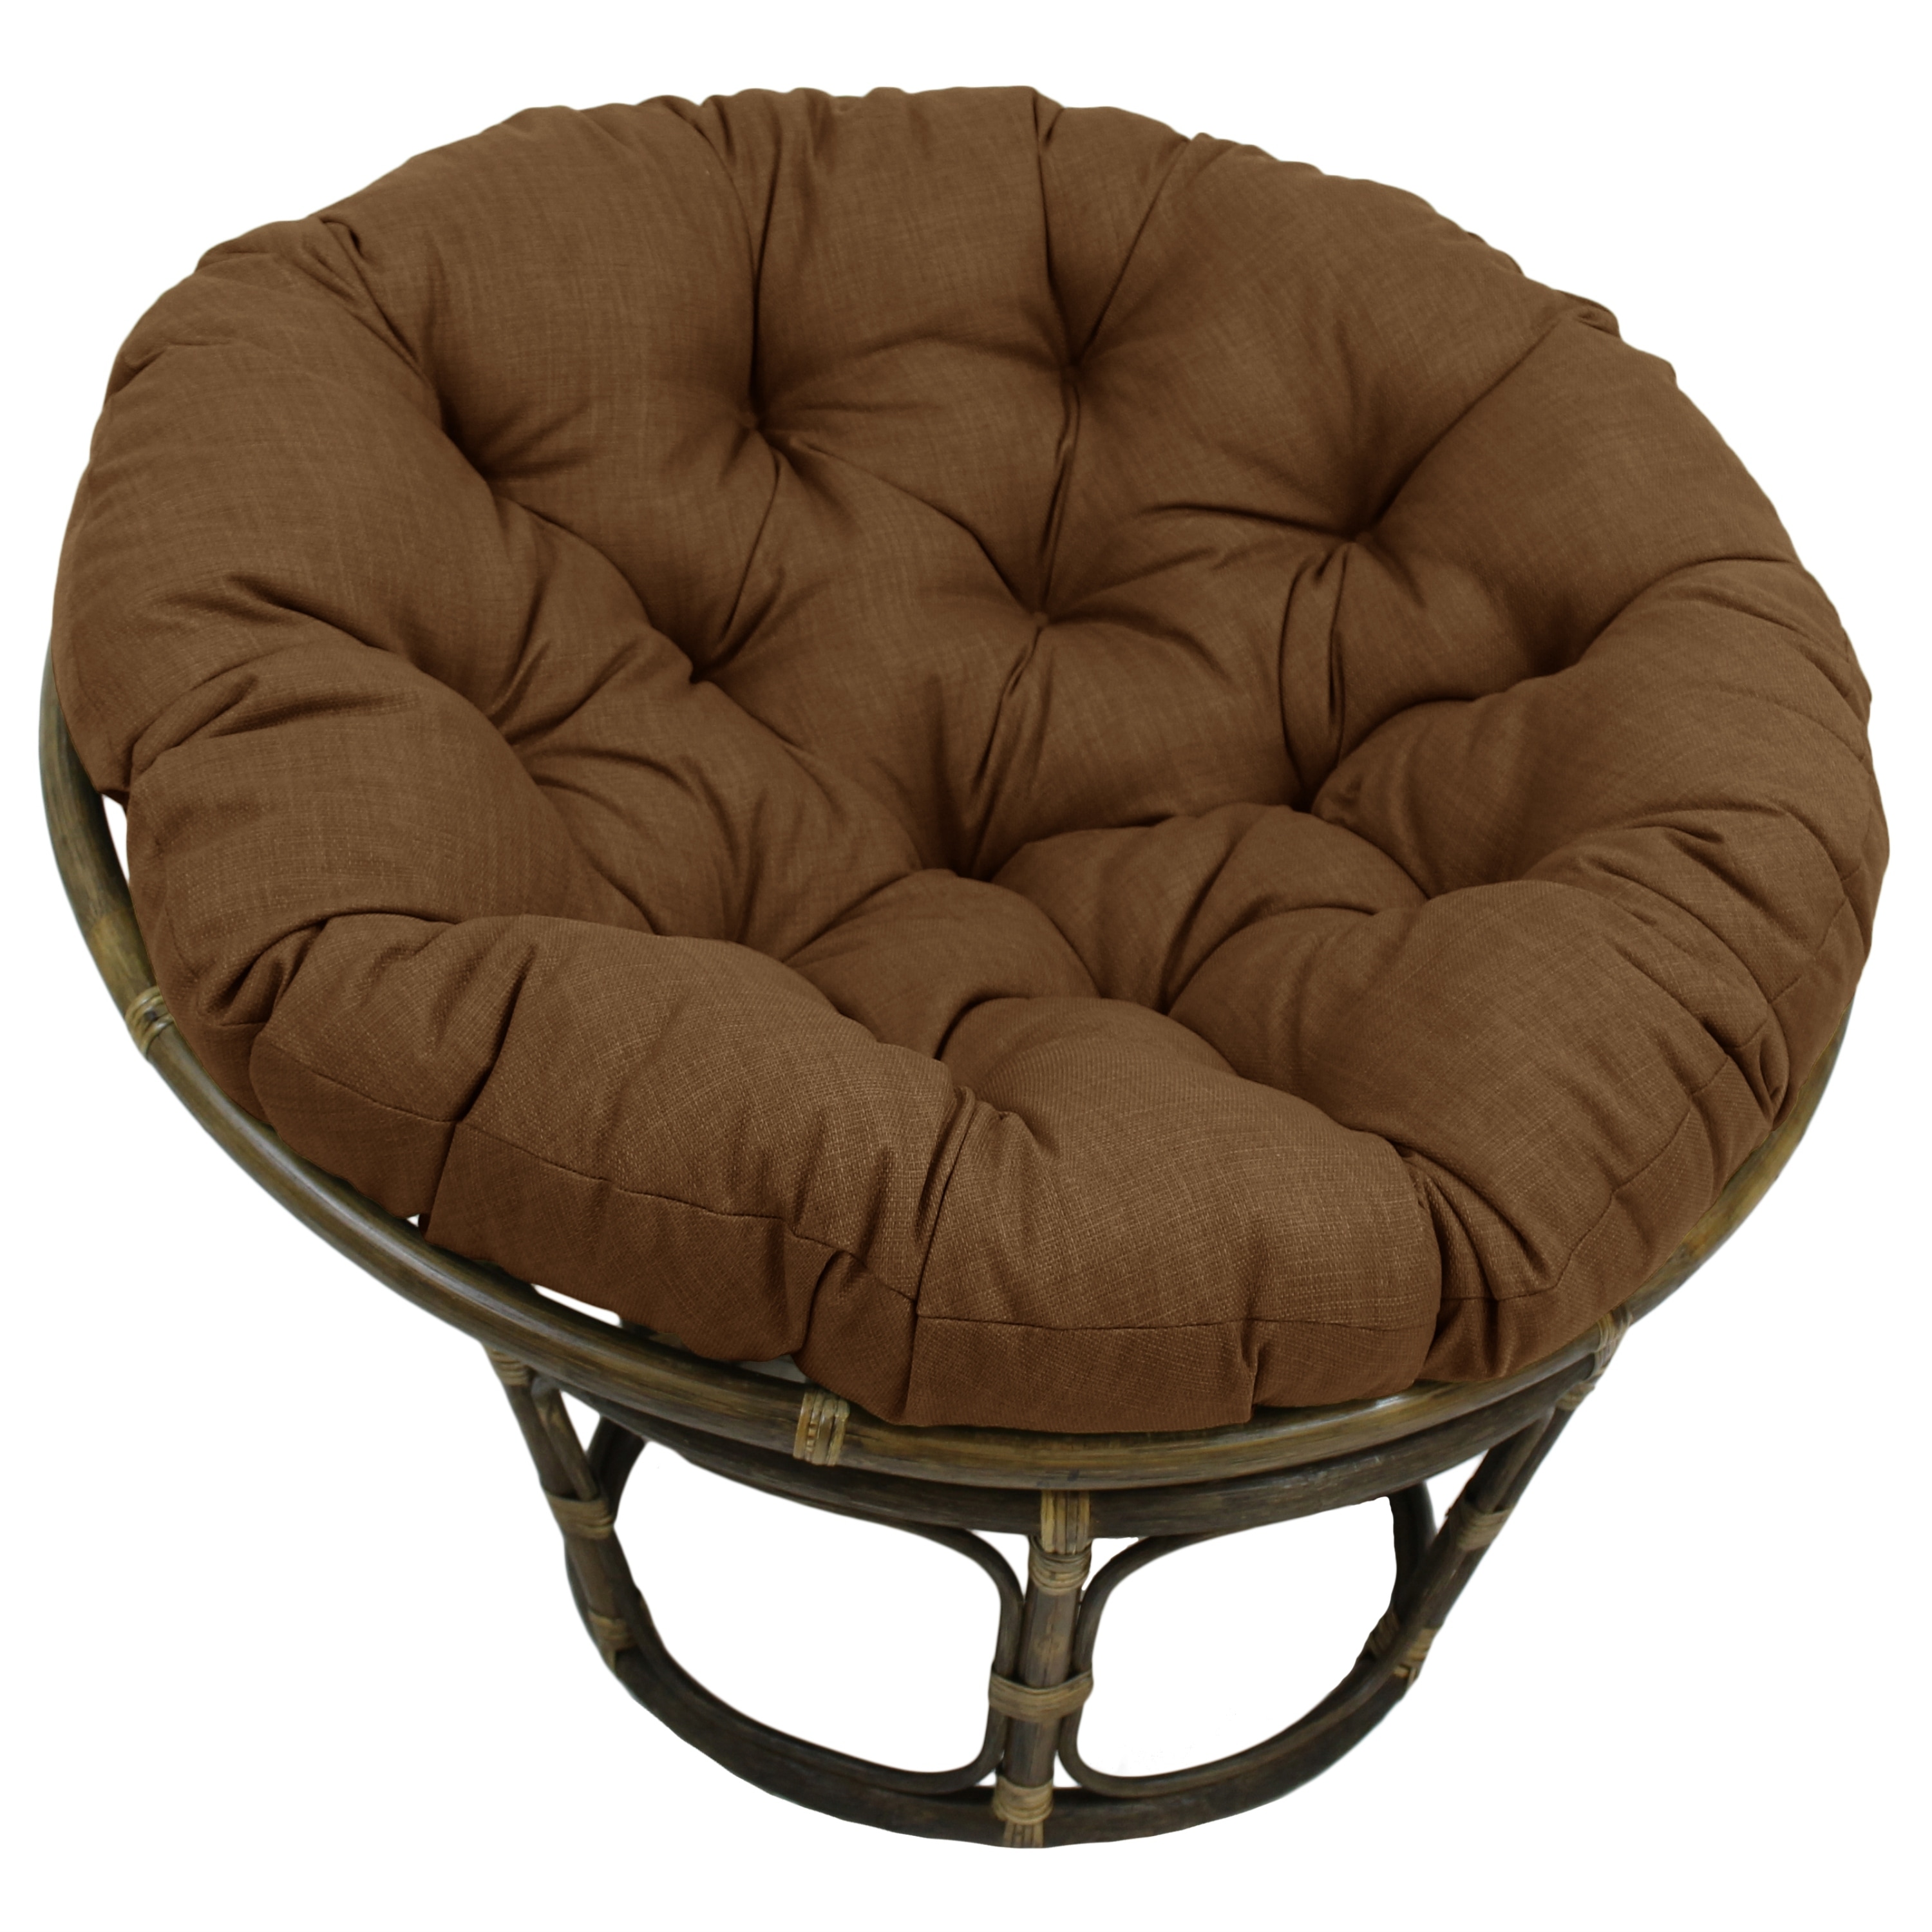 https://ak1.ostkcdn.com/images/products/is/images/direct/95fe52773082c66d451584c0de55c4ef85546da9/48-inch-Indoor-Outdoor-Papasan-Cushion-%28Cushion-Only%29.jpg